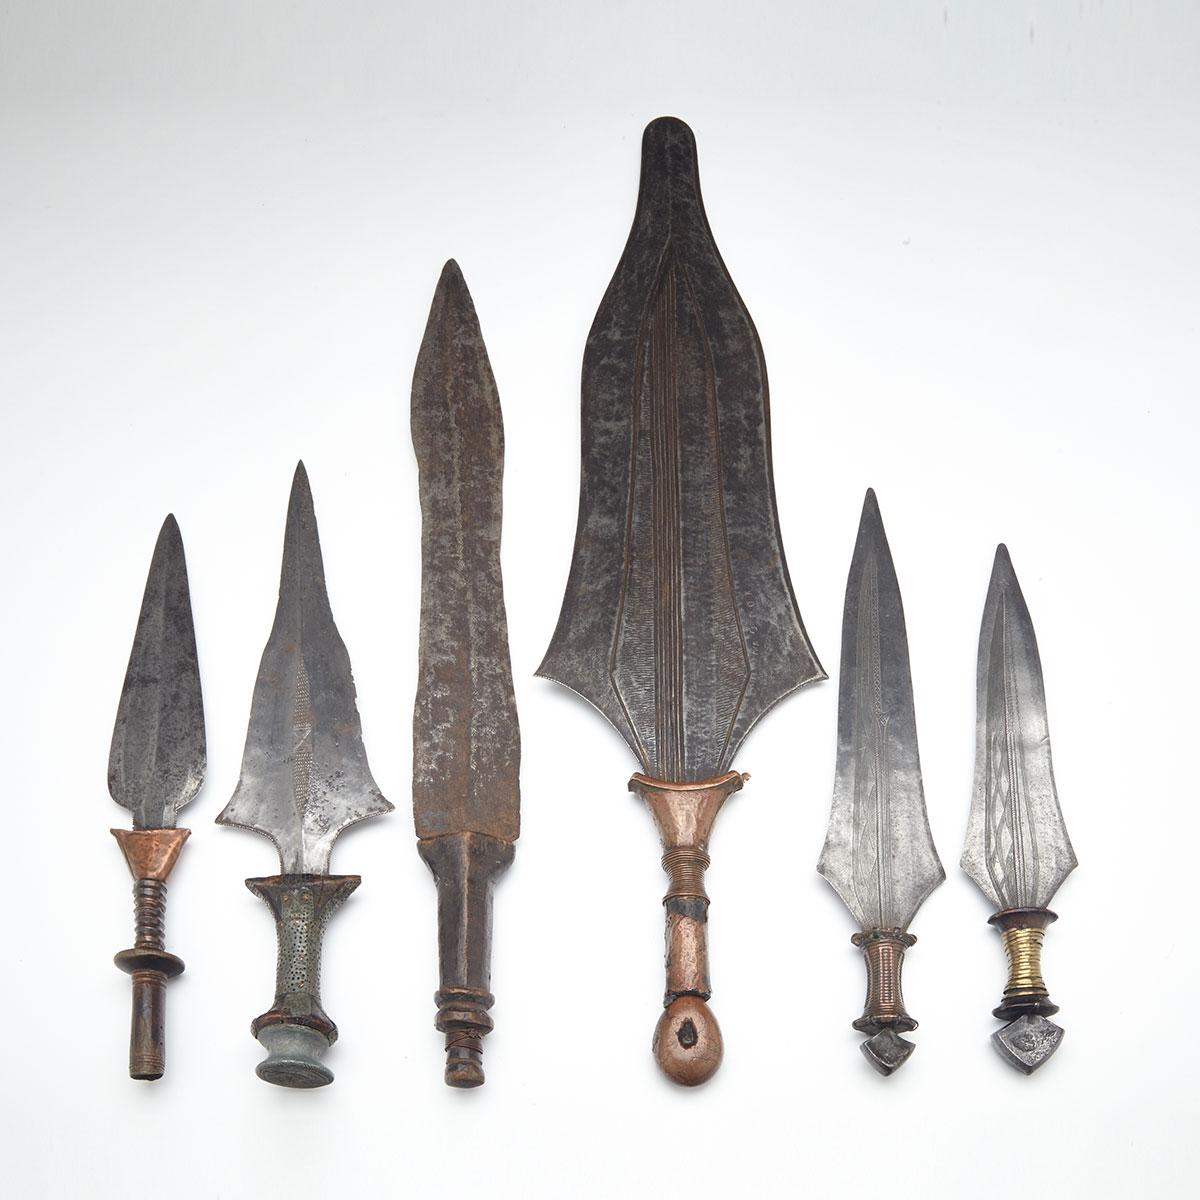 Six African Short Swords, 19th/20th centuries